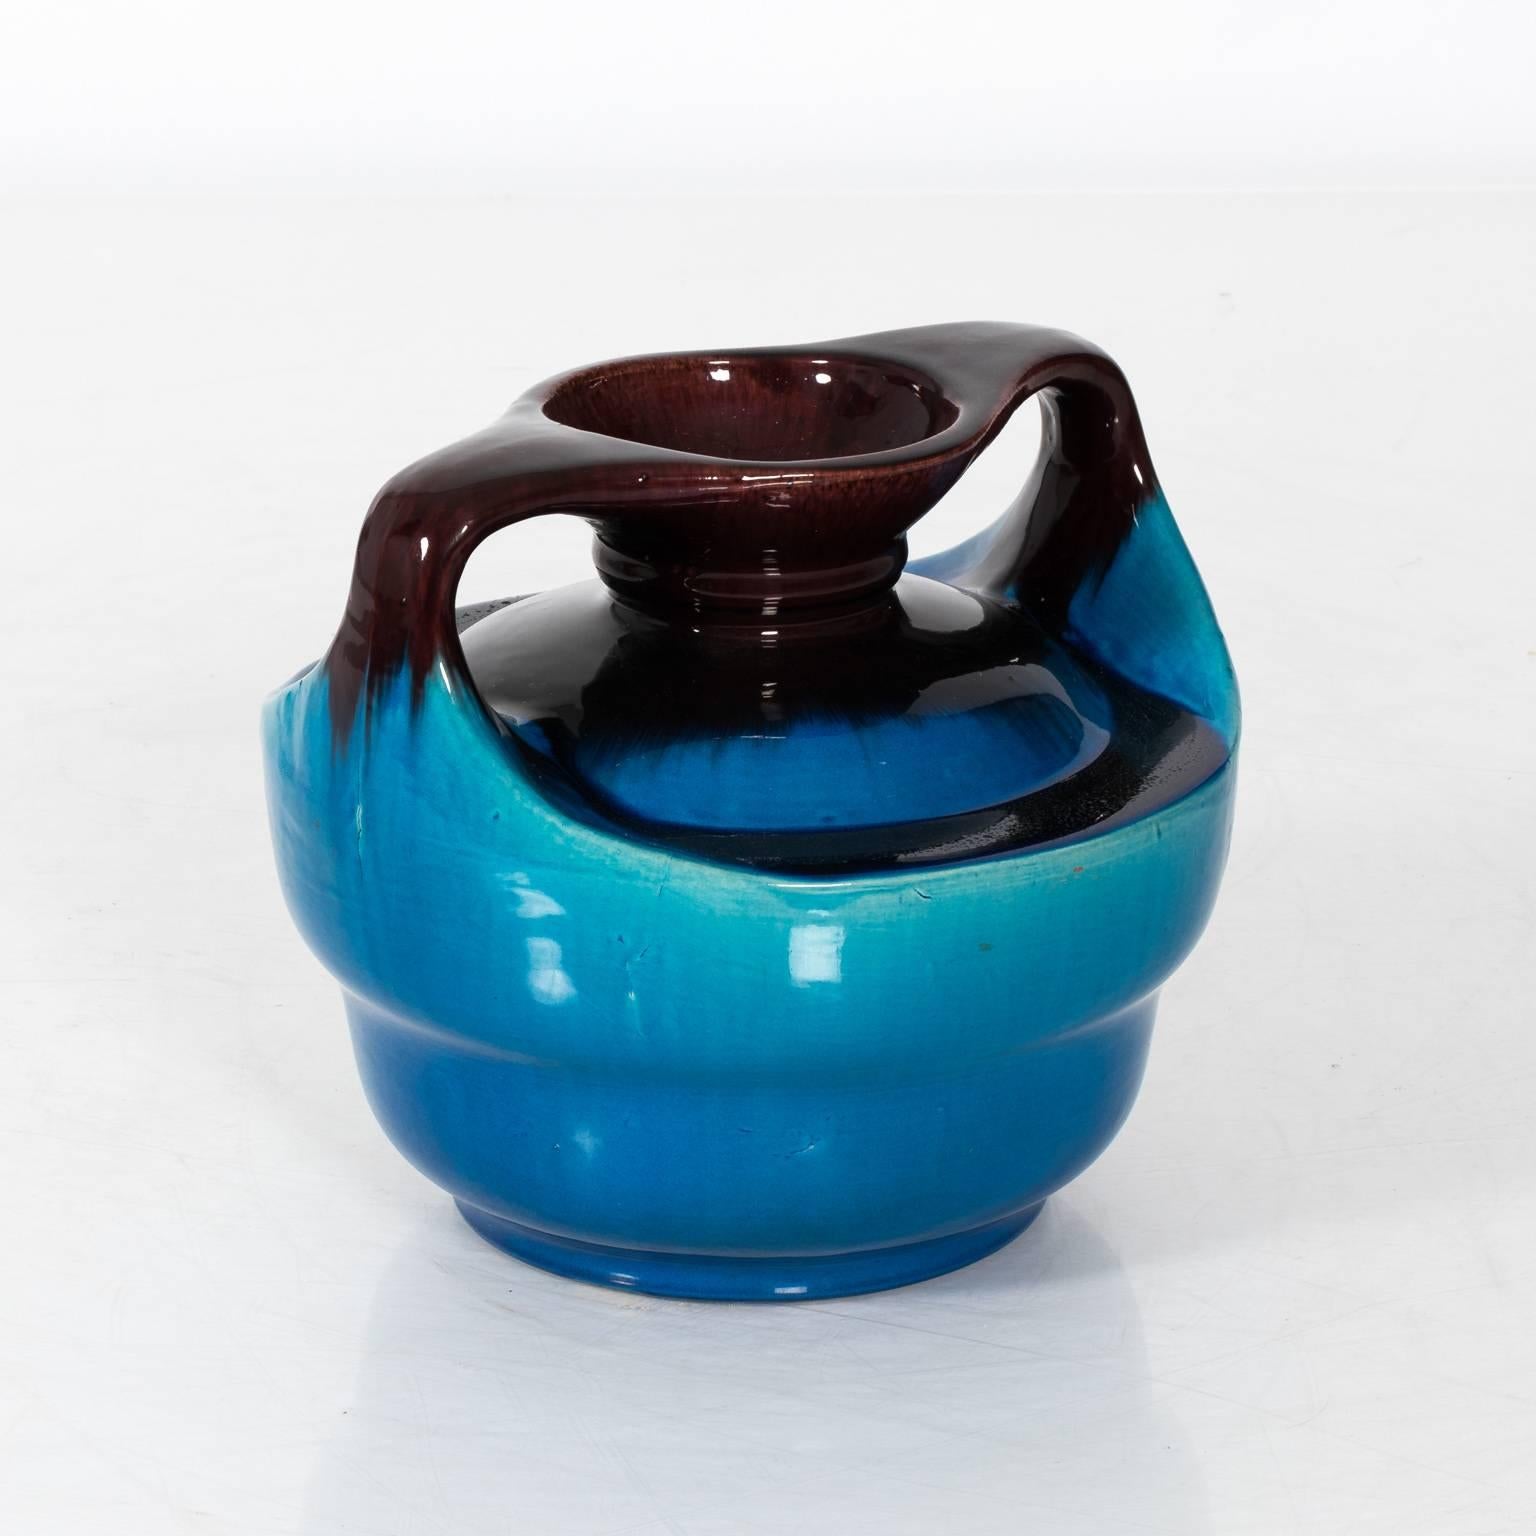 Modernist Japanese Kyoto Pottery In Excellent Condition For Sale In Stamford, CT